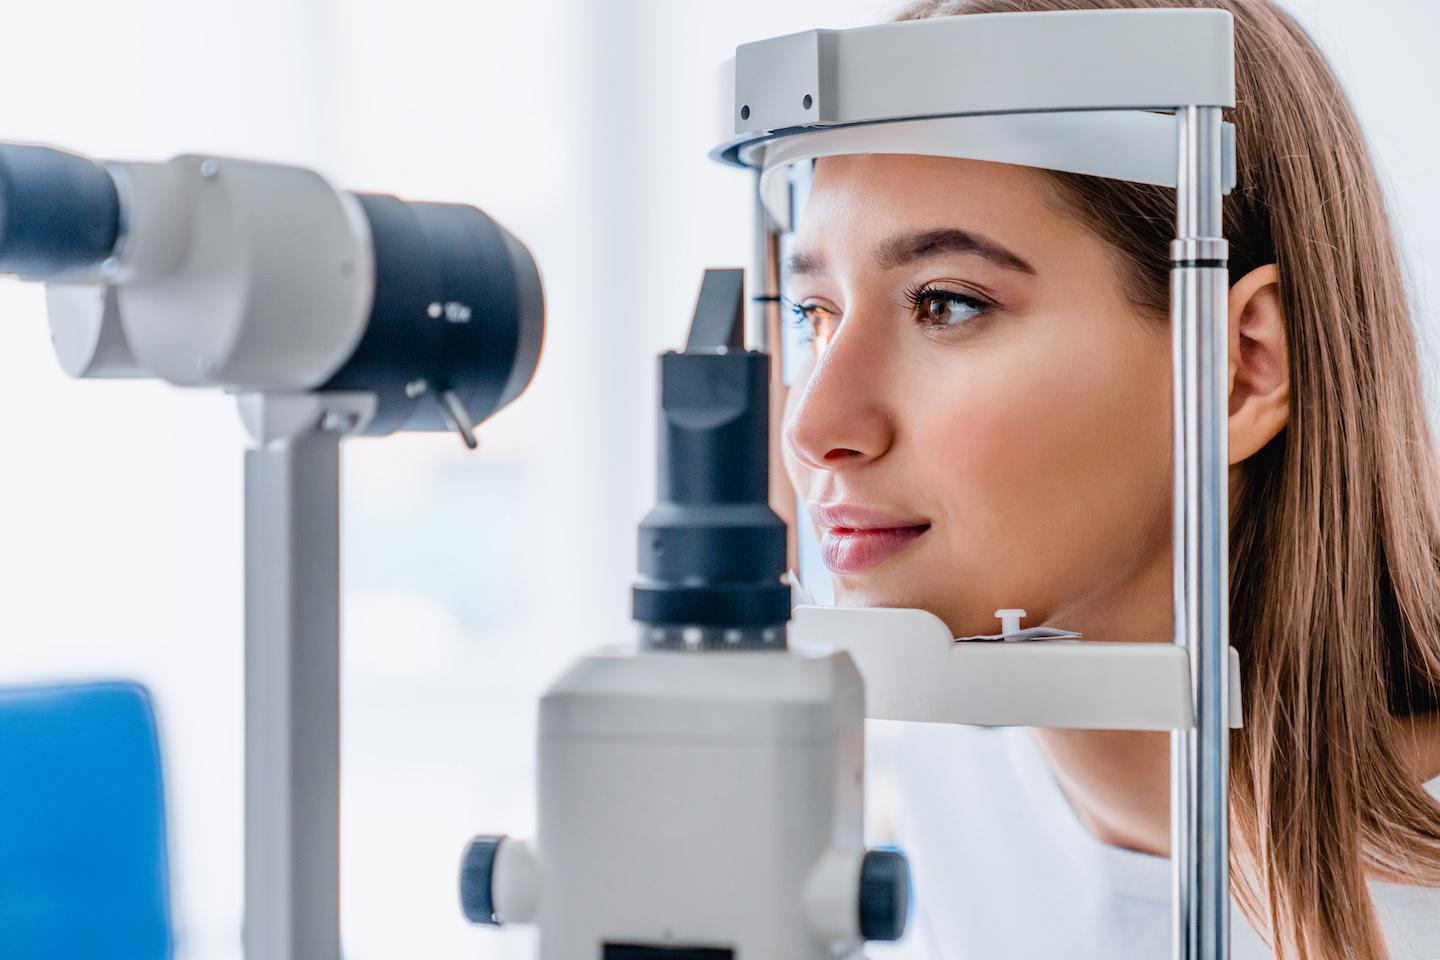 Female patient getting a vision exam.